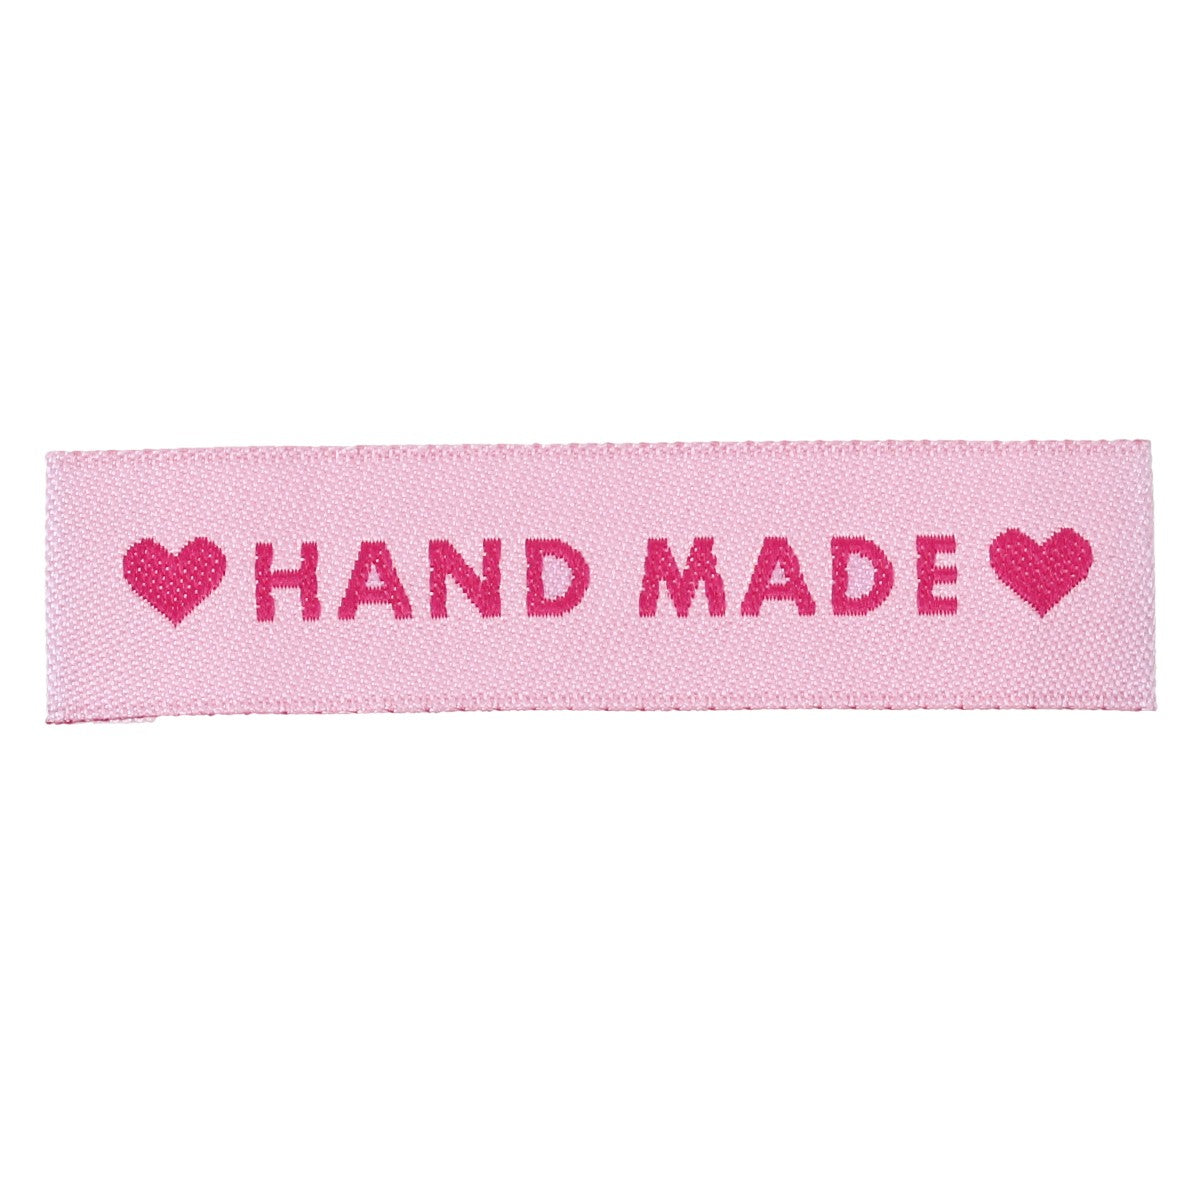 Labels Pink 'Hand Made' with heart 60mm x 15mm (10pcs)